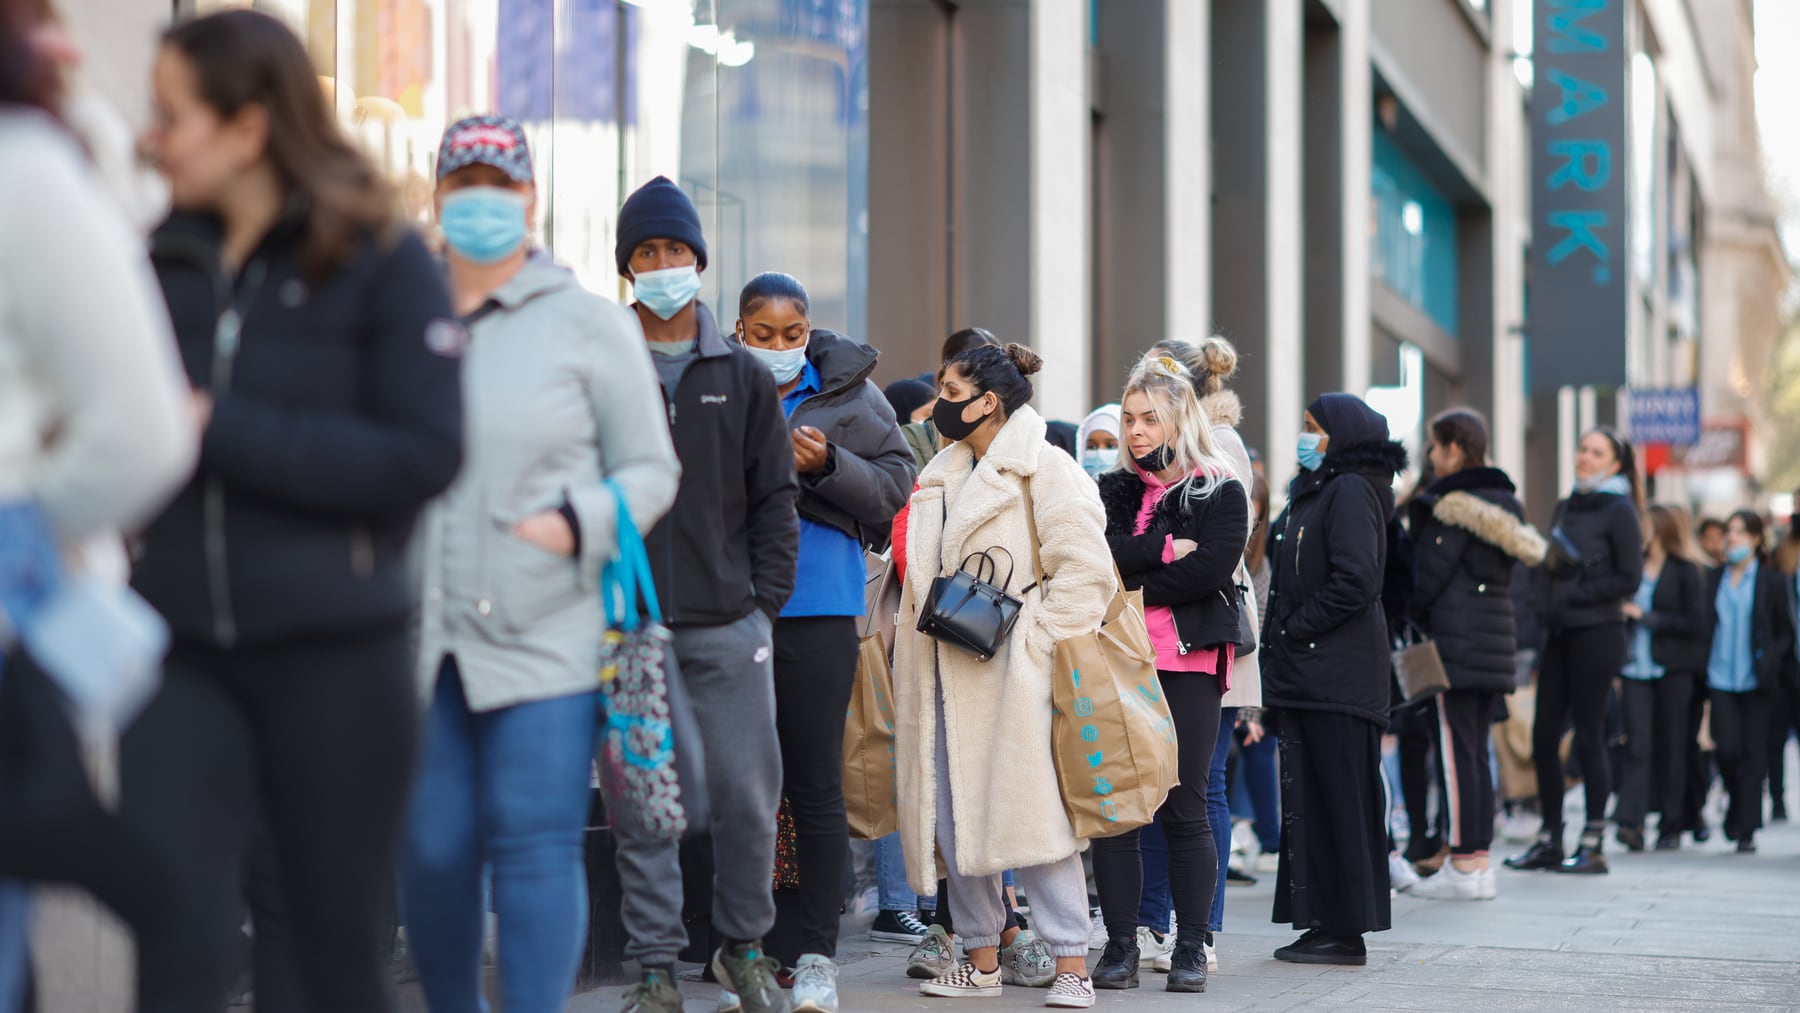 Customers queue outside a Primark store following its reopening on Oxford Street in central London. Getty Images.